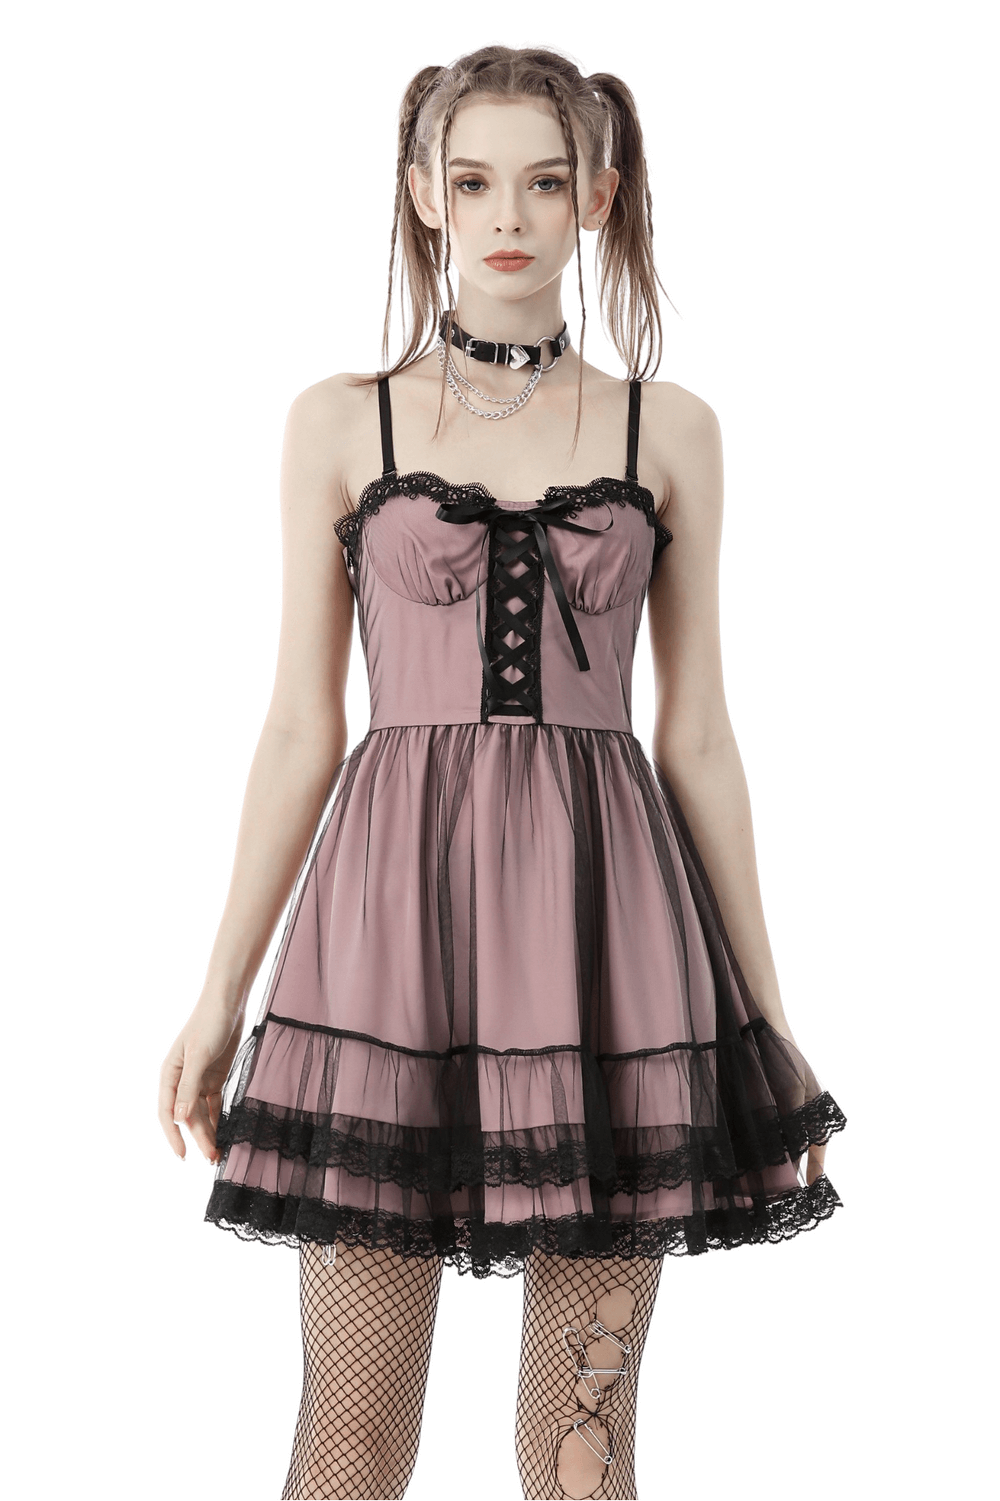 Elegant Lace-Up Dress with Ruffled Hem and Delicate Details